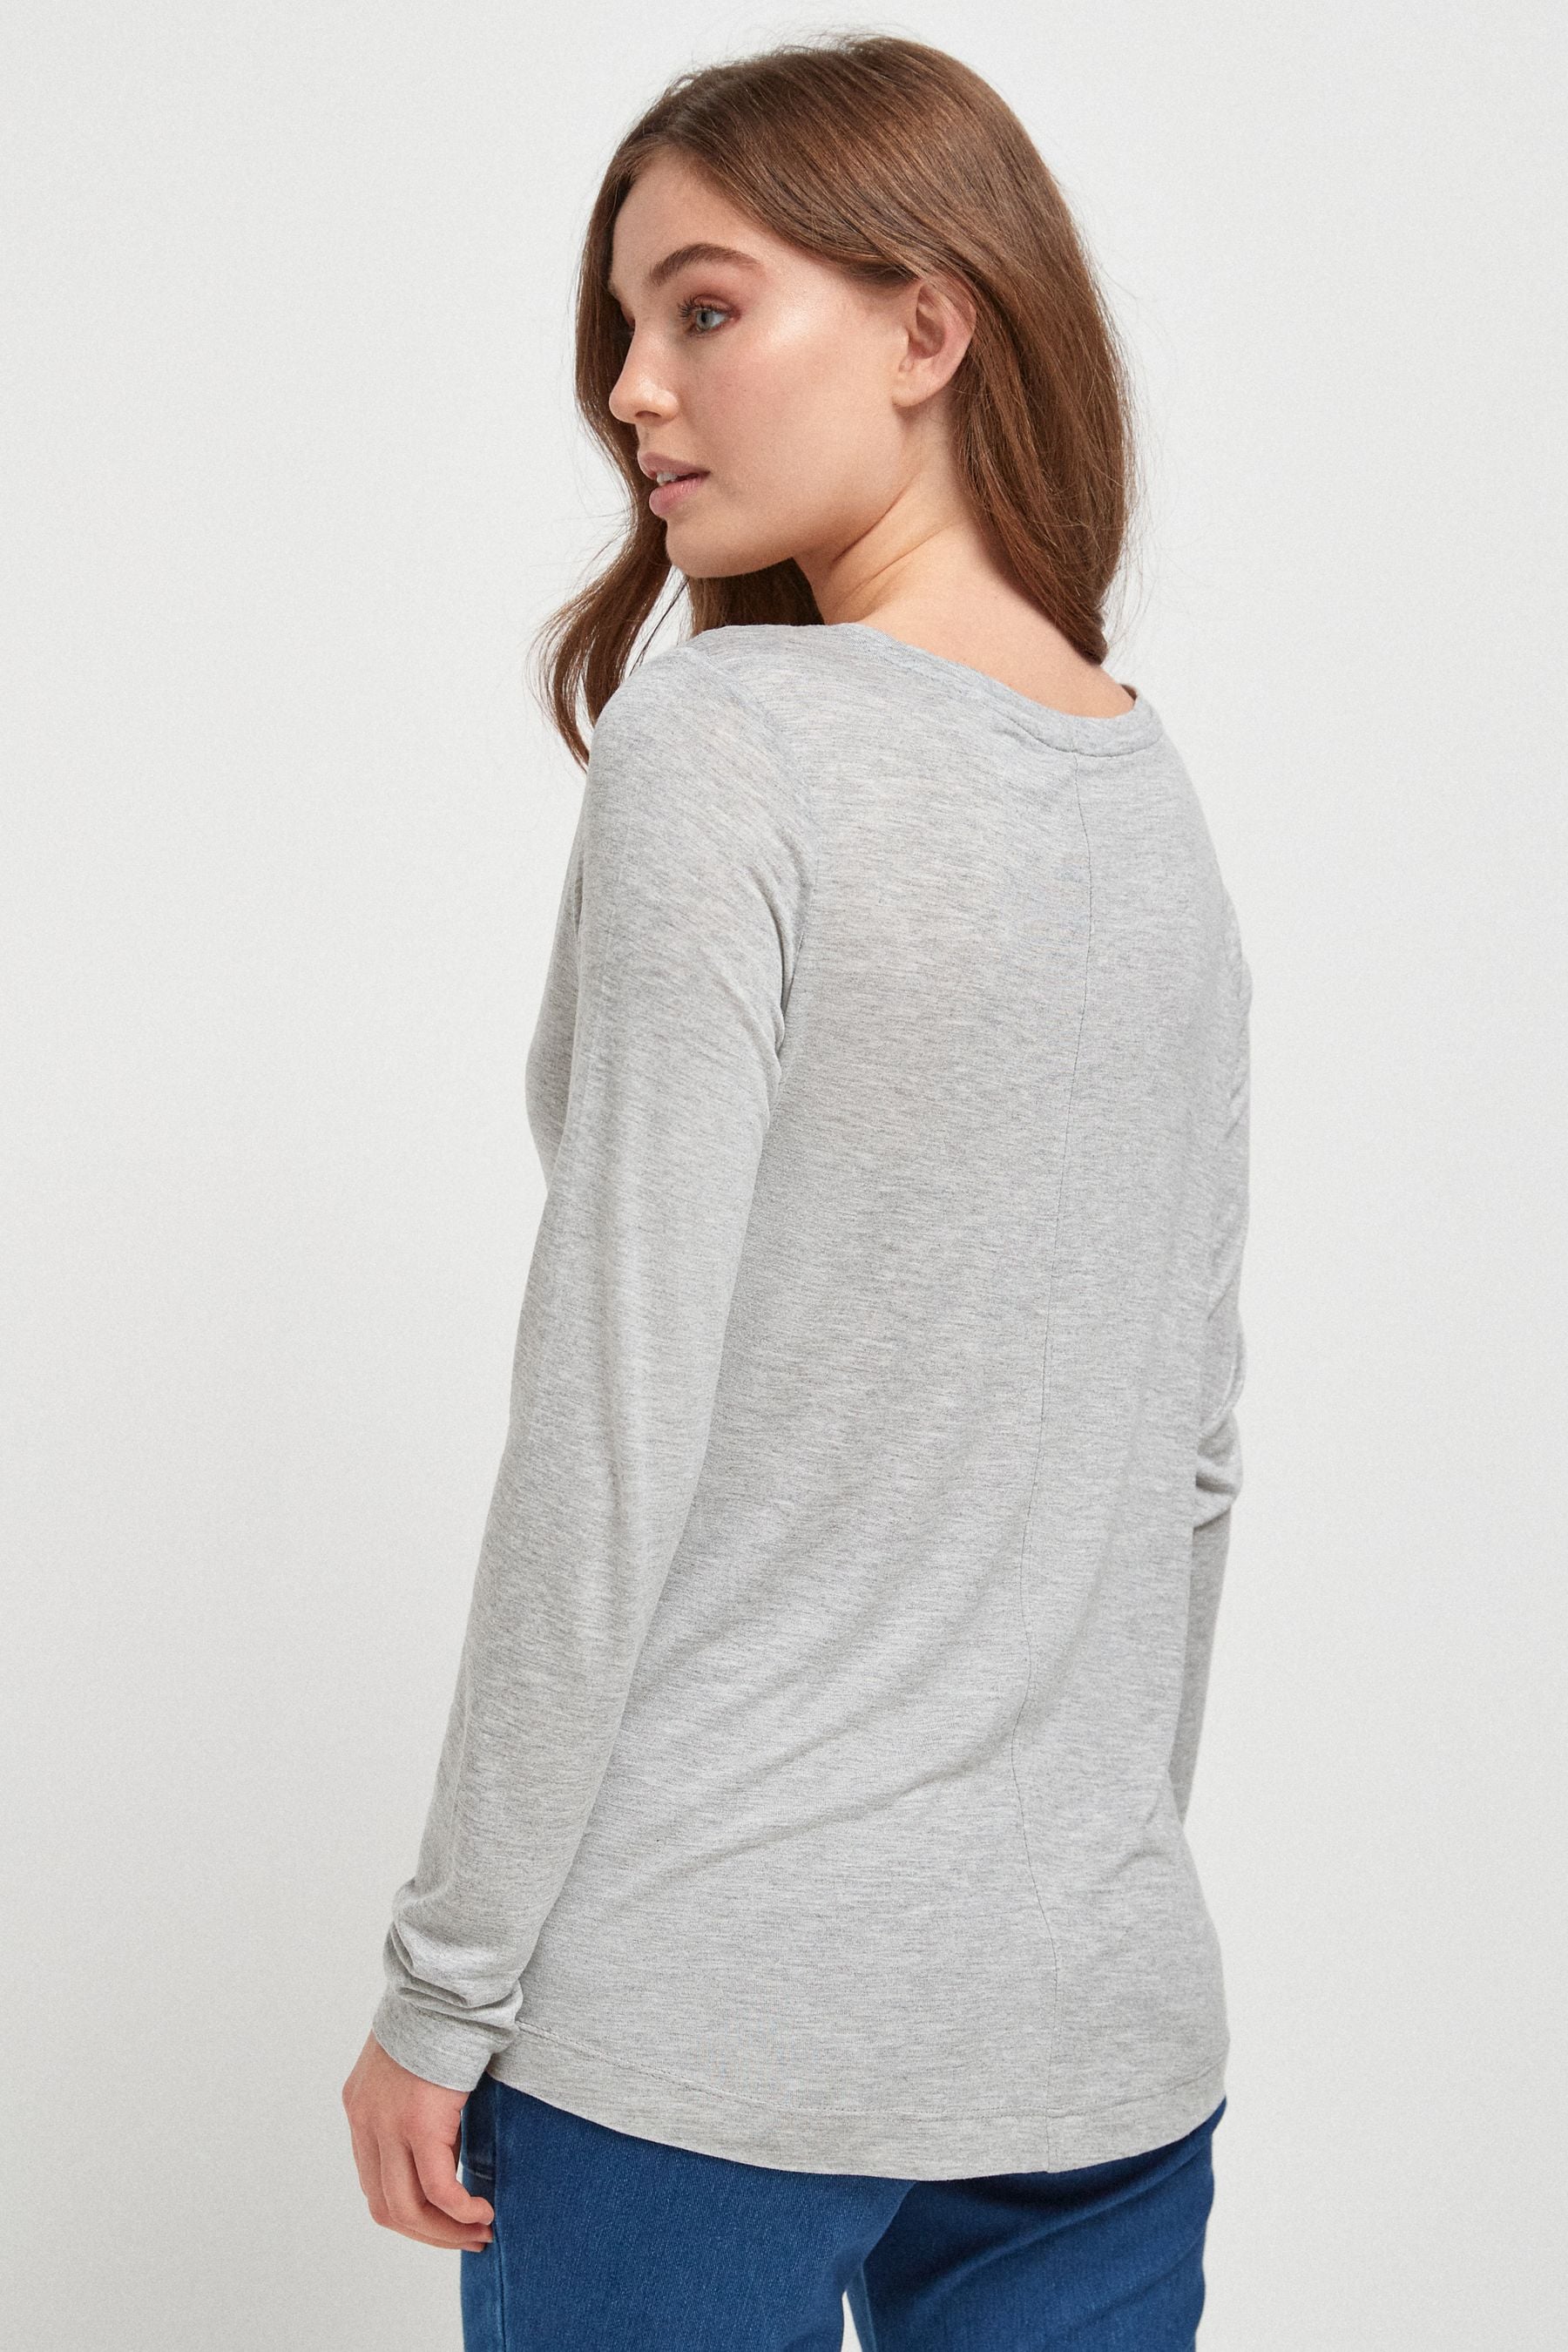 Buy Grey Marl Slouch V-Neck Long Sleeve T-Shirt from the Next UK online ...